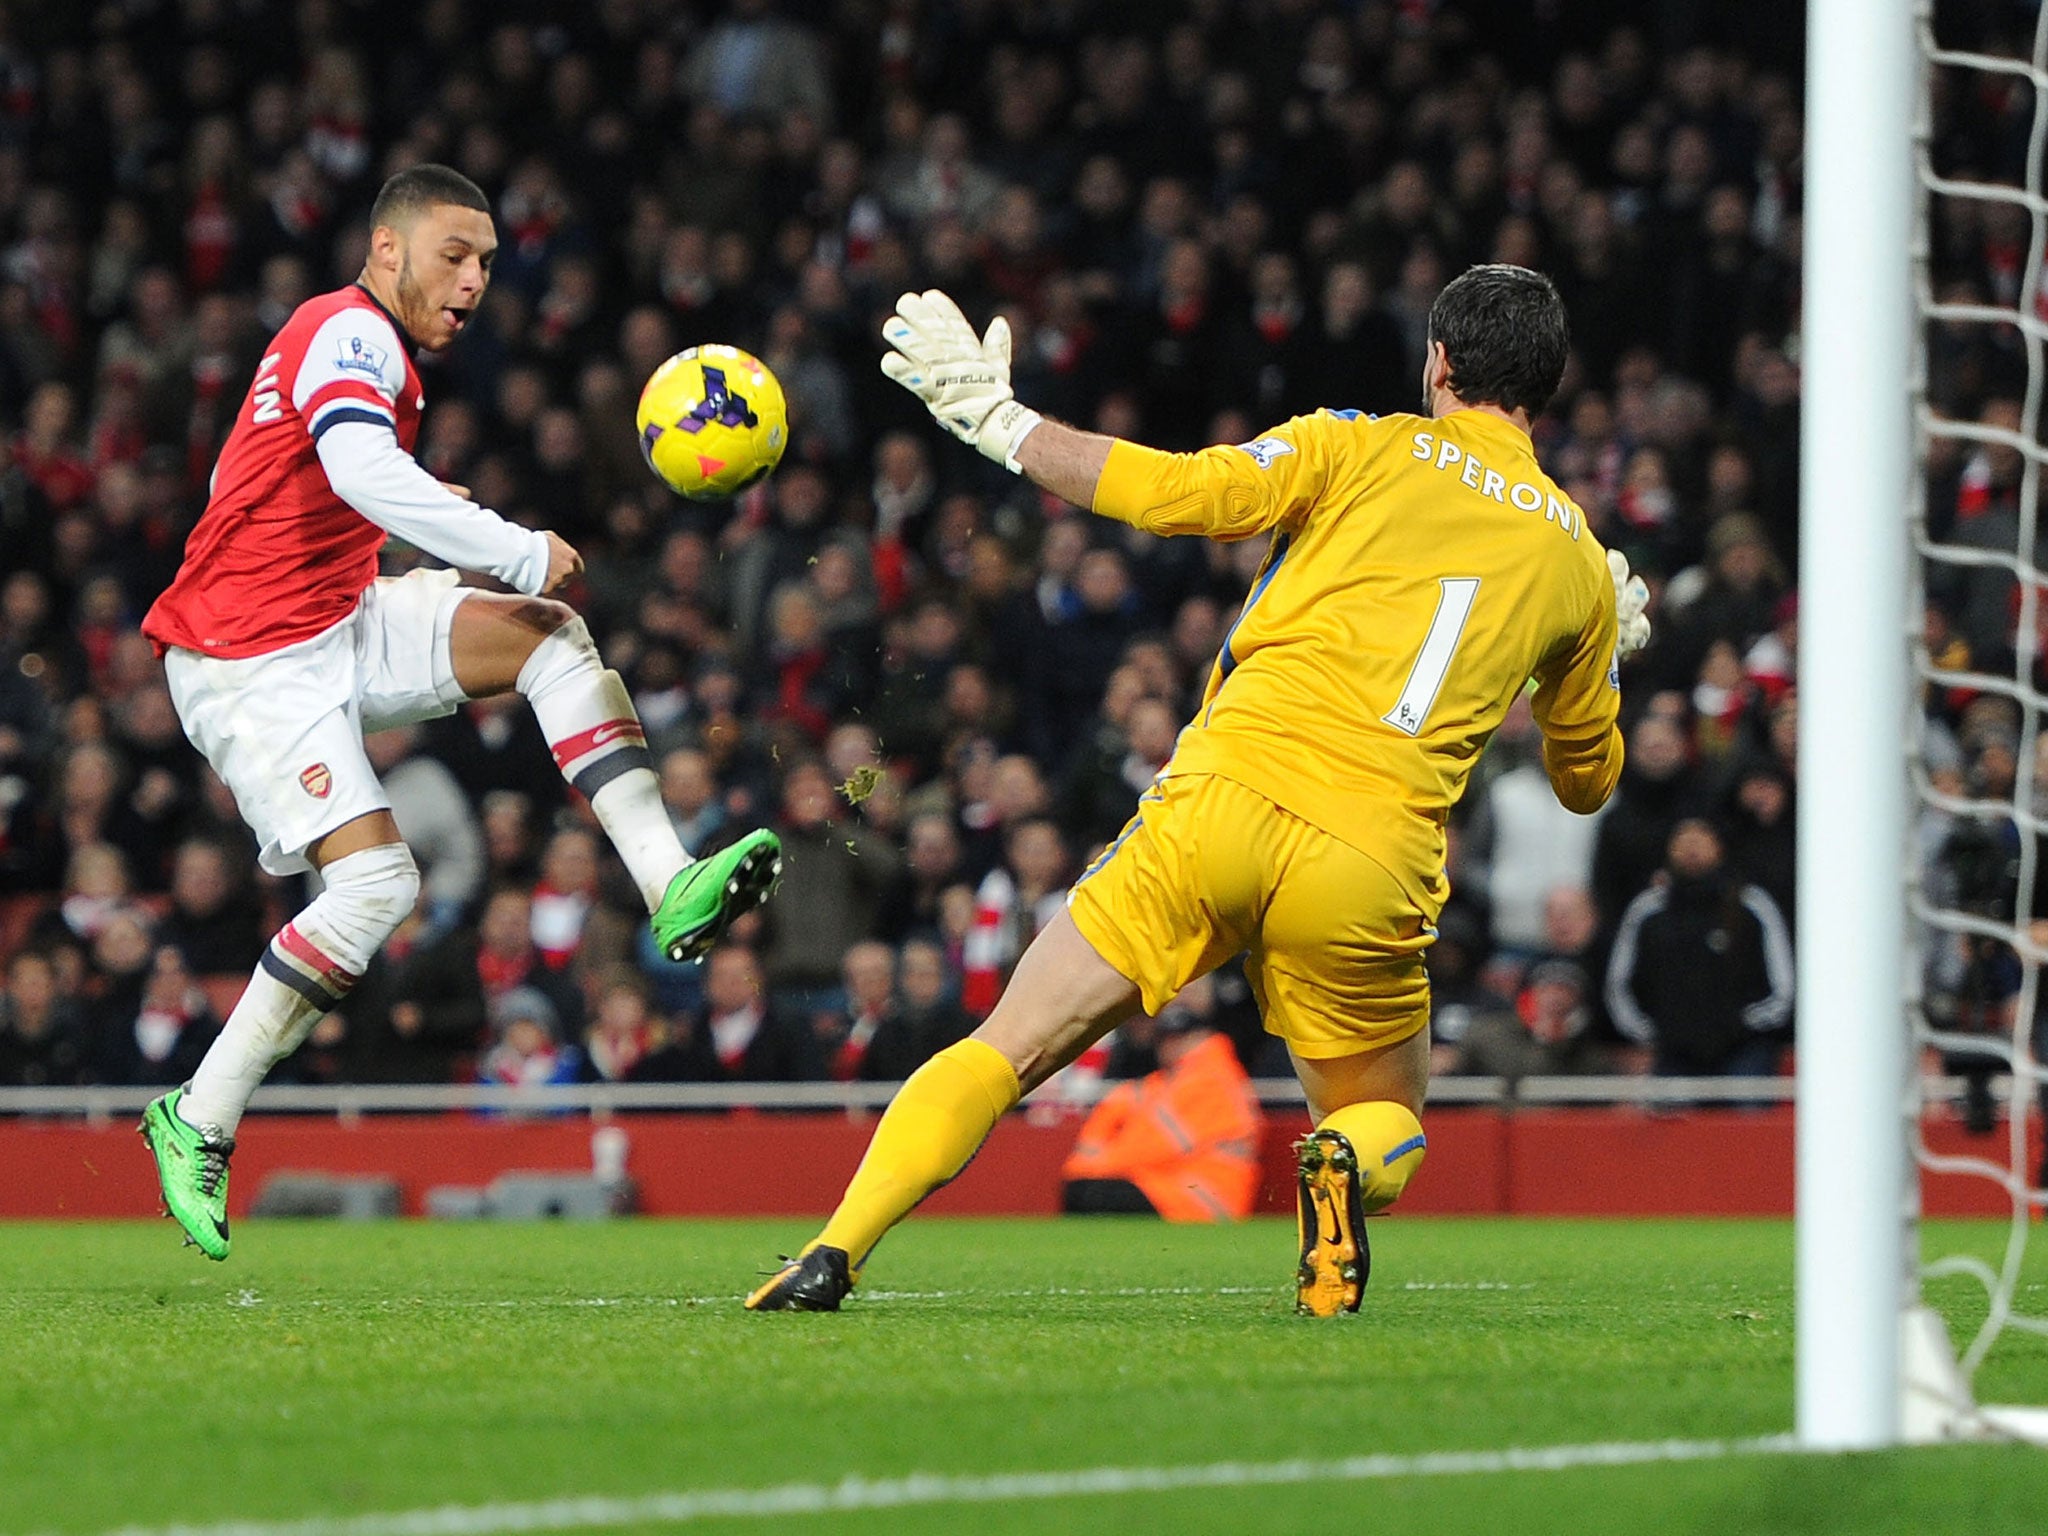 Alex Oxlade-Chamberlain opens the scoring for Arsenal